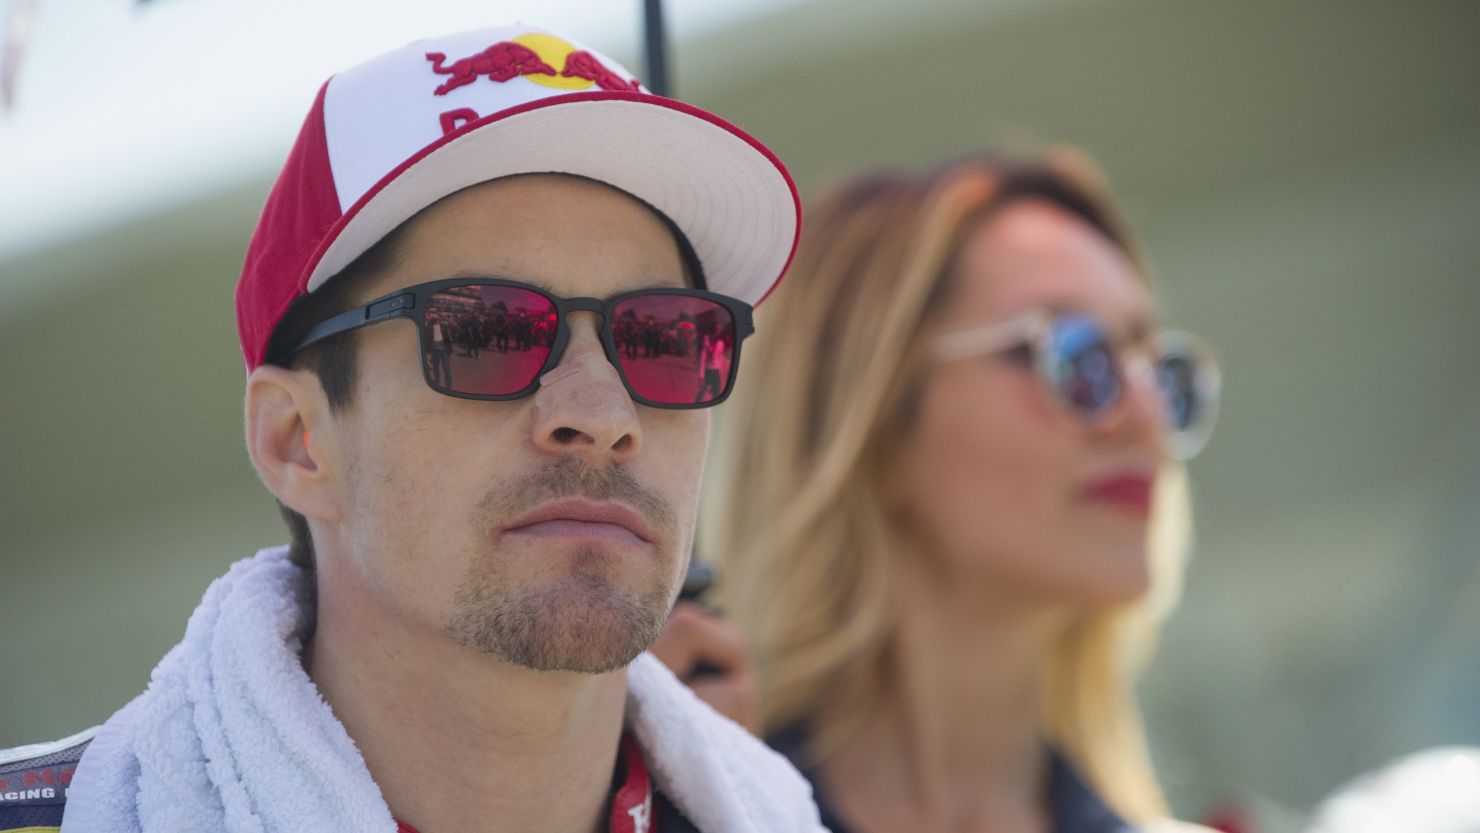 Nicky Hayden, who won the MotoGP world title in 2006 is 'critical' after a cycling accident.